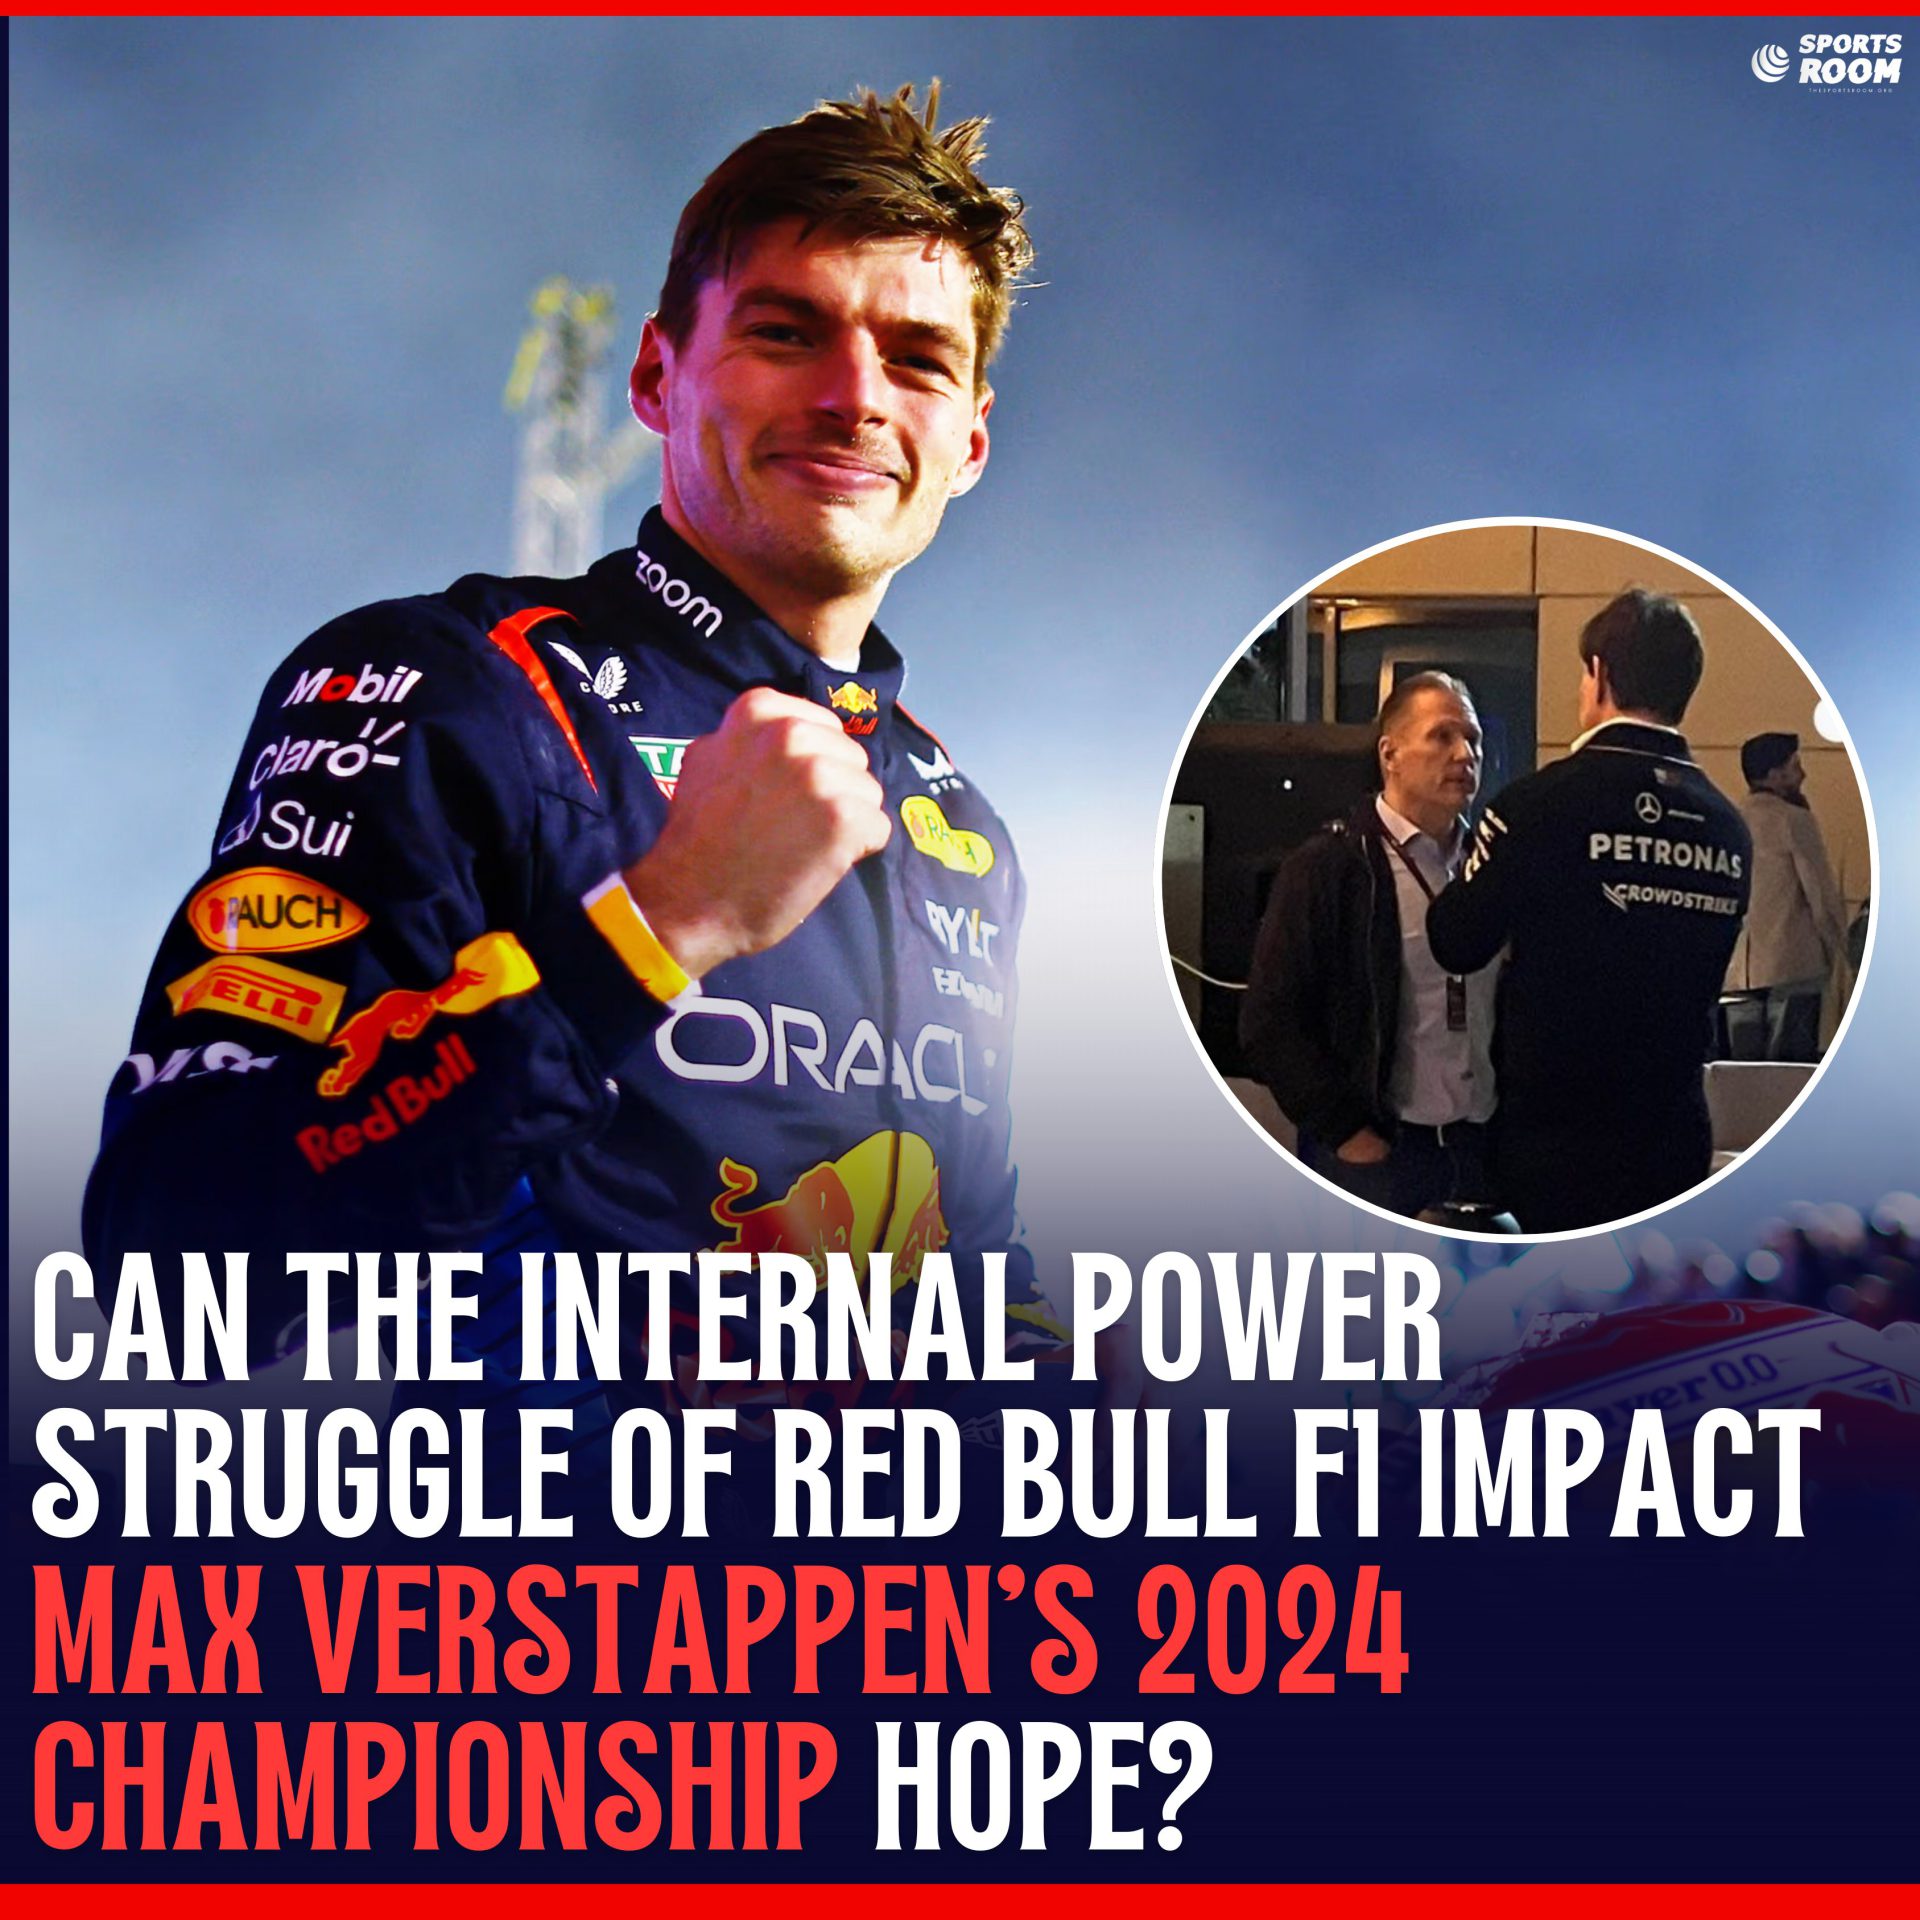 How Will the Trouble at Red Bull Impact Max Verstappen’s Decision to Stay or Leave the Team? - THE SPORTS ROOM